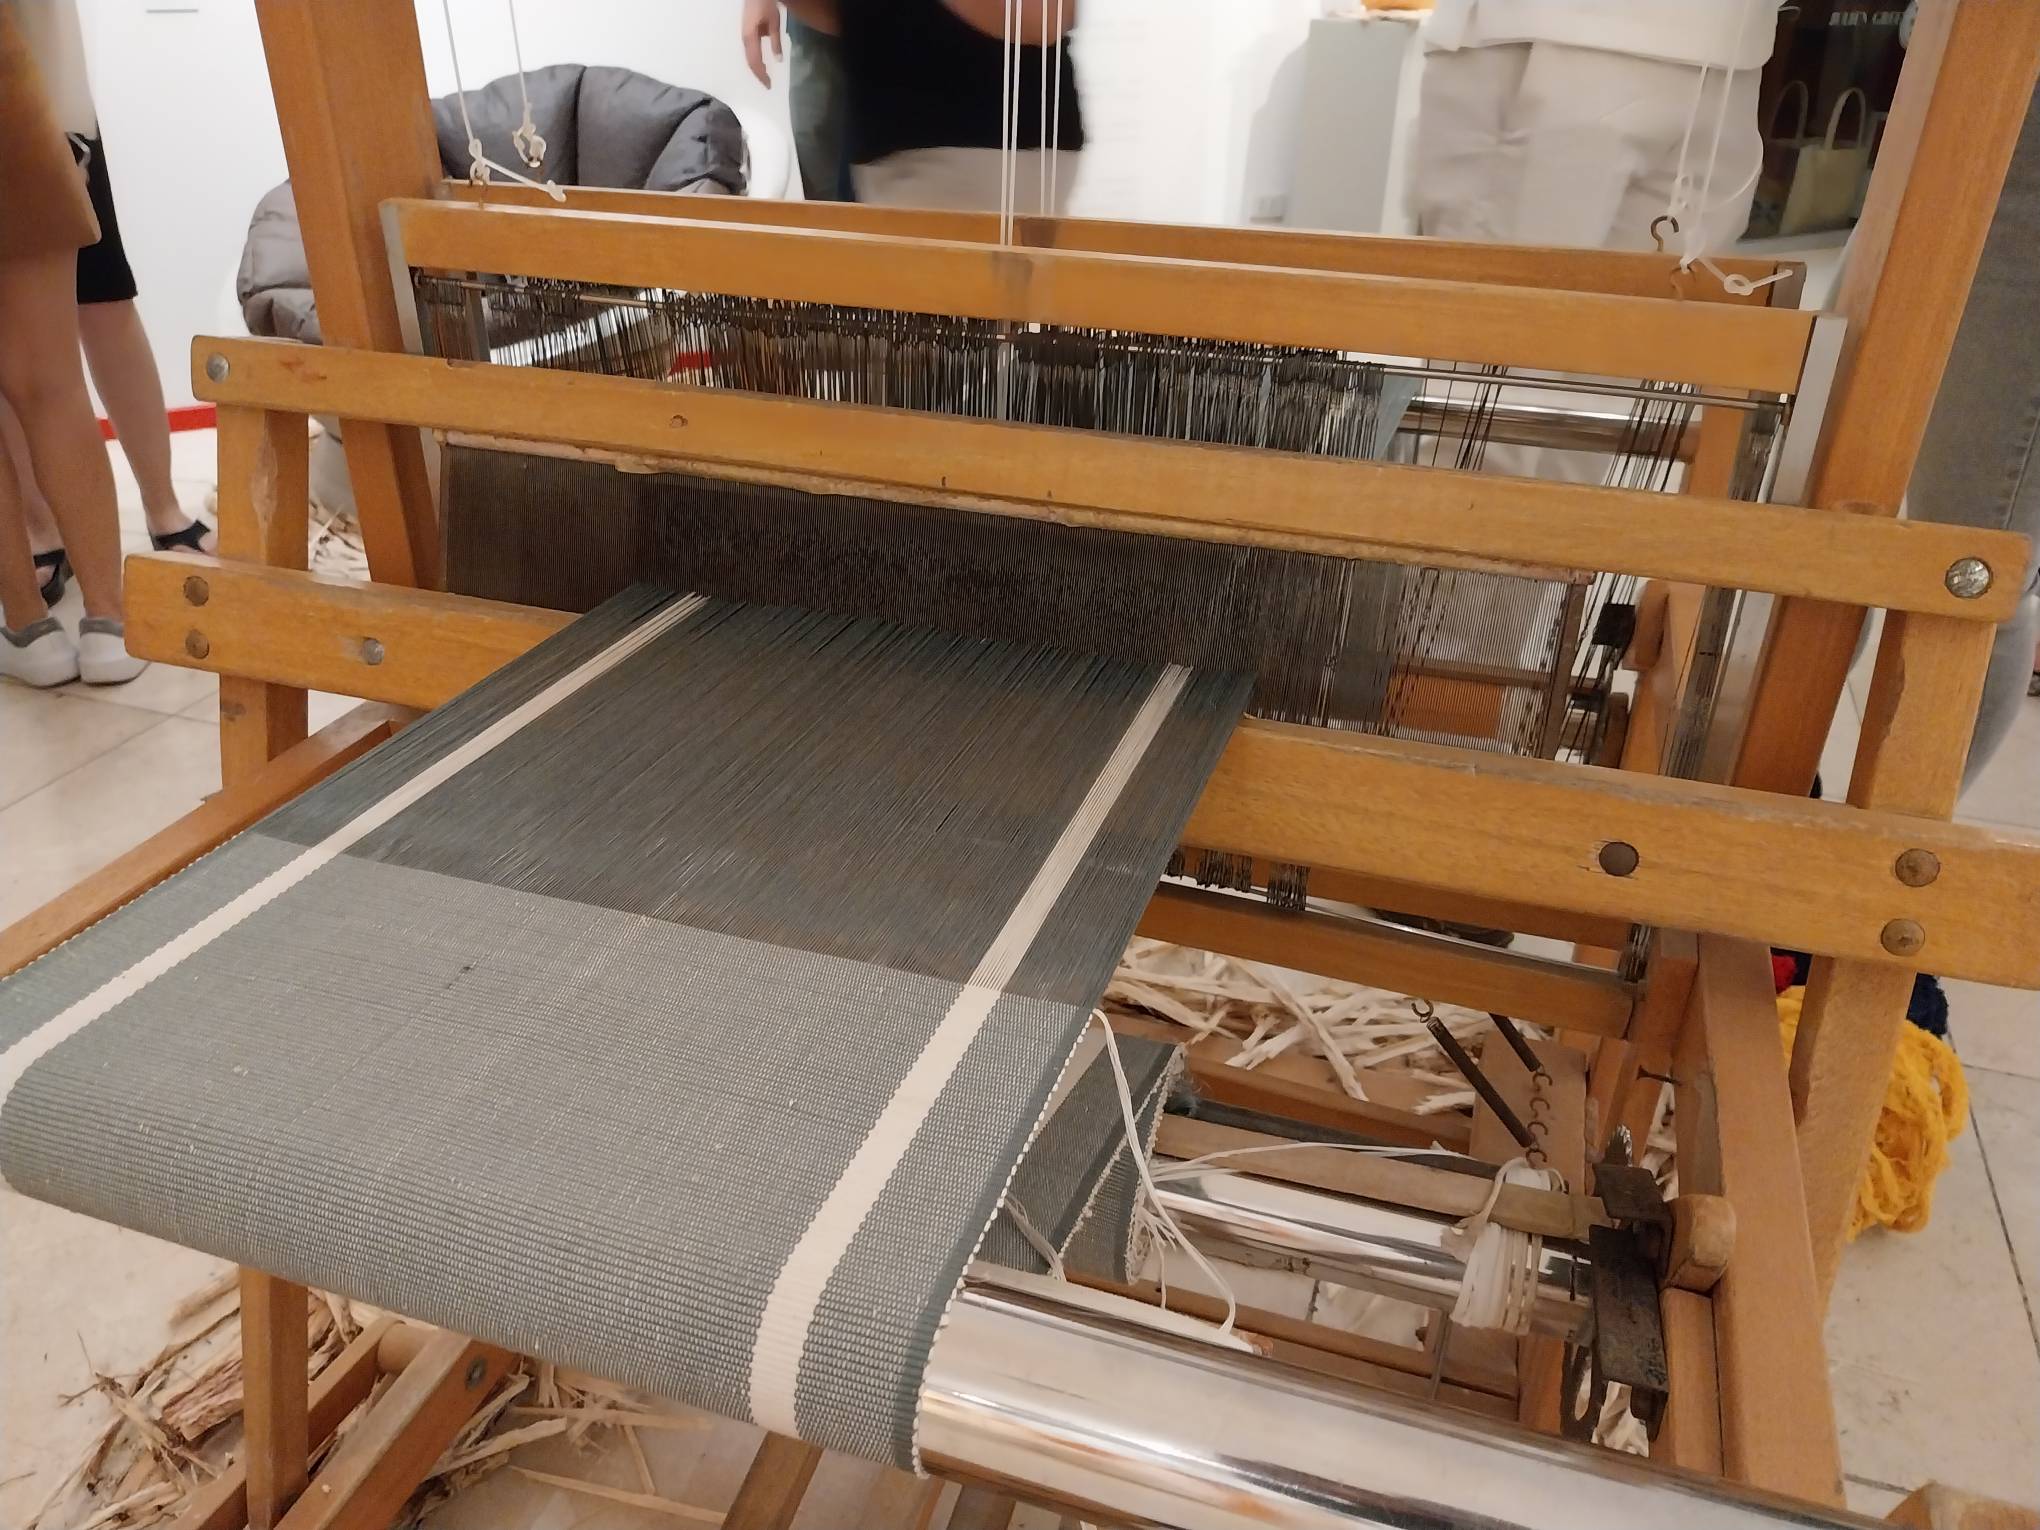 Large weaving loom with fabric on the machine. Photo by Elle Yap.